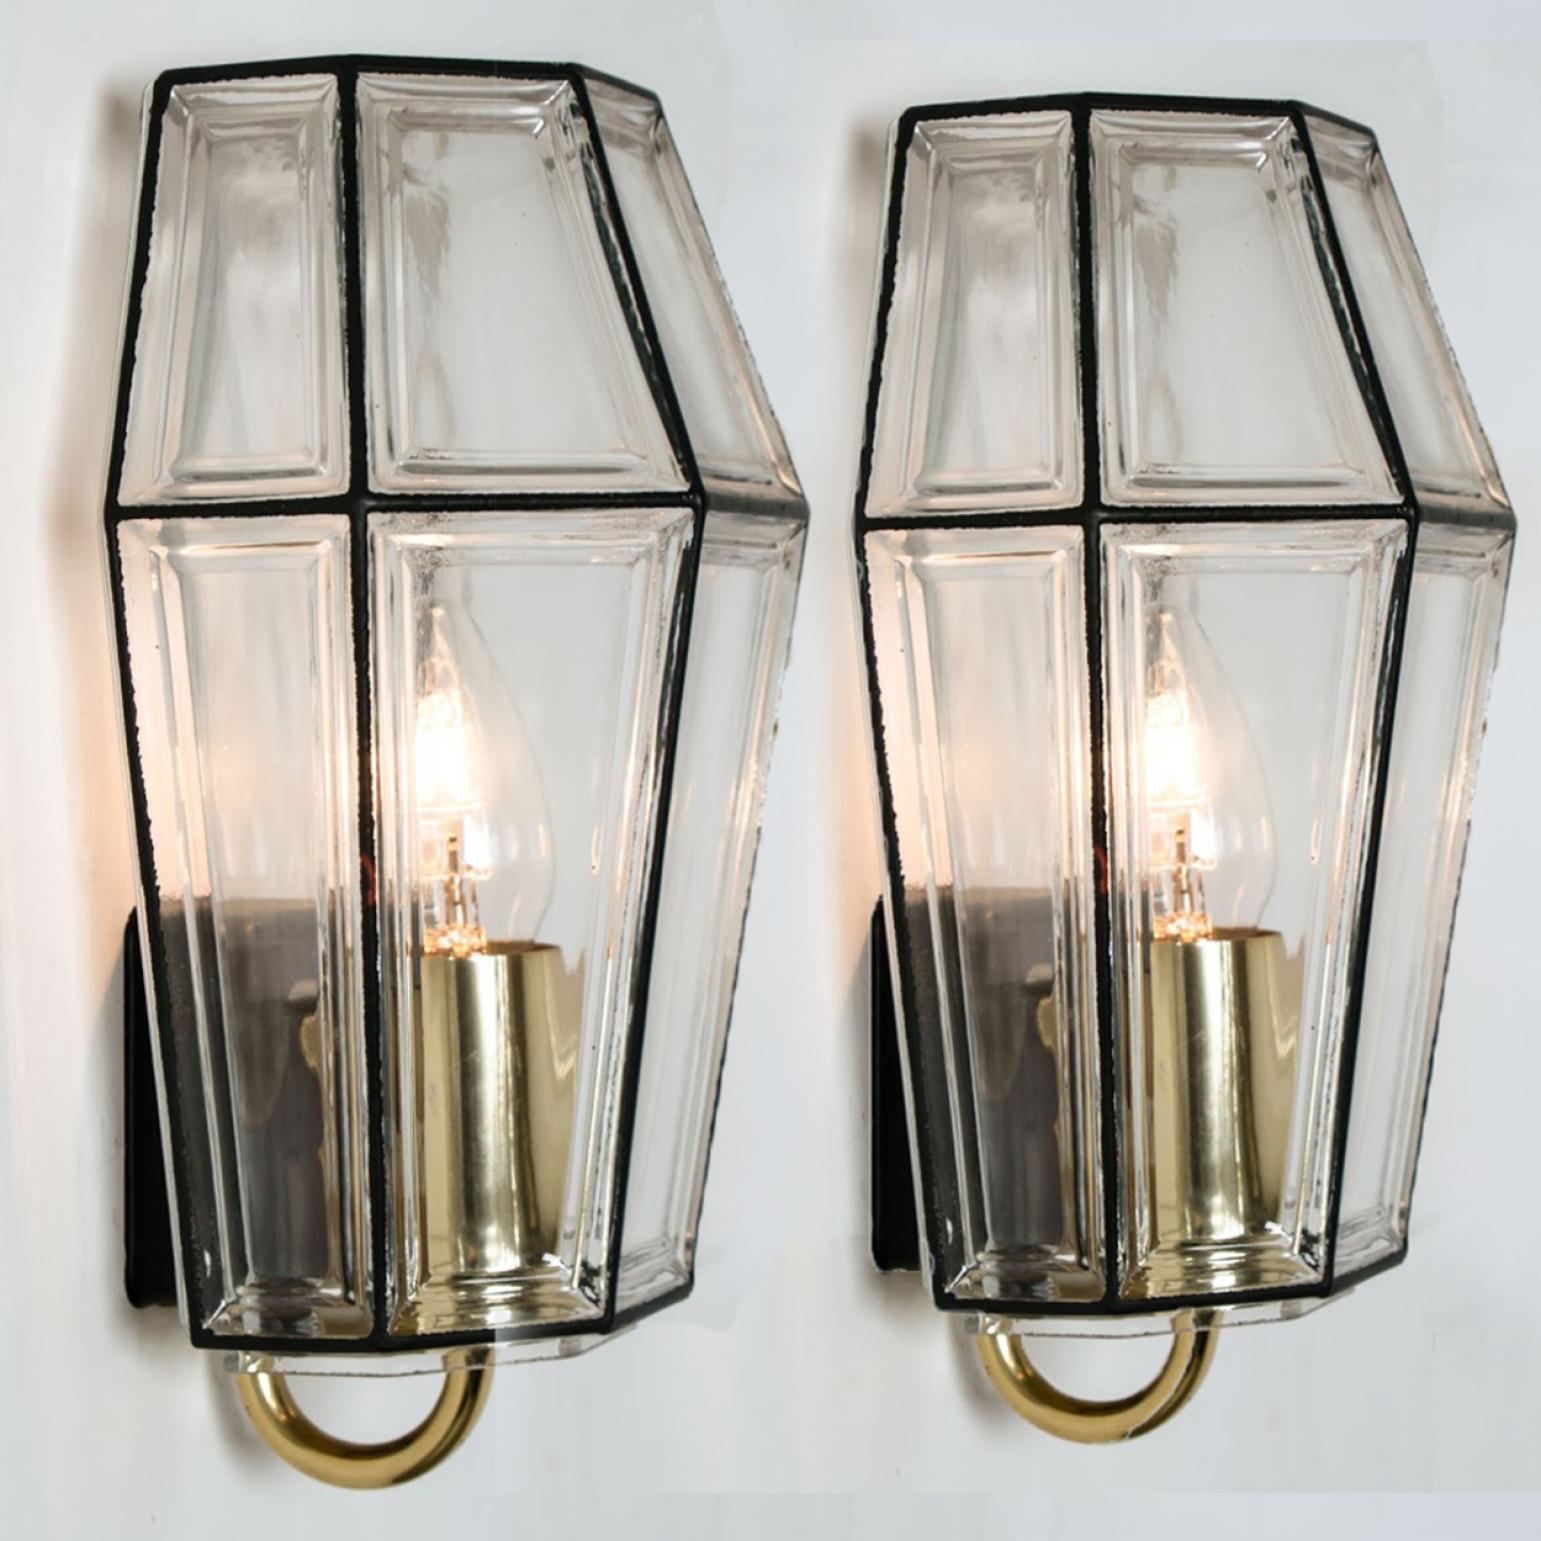 This beautiful and unique set of hand blown glass wall lights were manufactured by Glashütte Limburg in Germany during the 1960s (late 1960s-early 1970s). Beautiful craftsmanship. These midcentury vintage lights feature handmade, elaborate clear